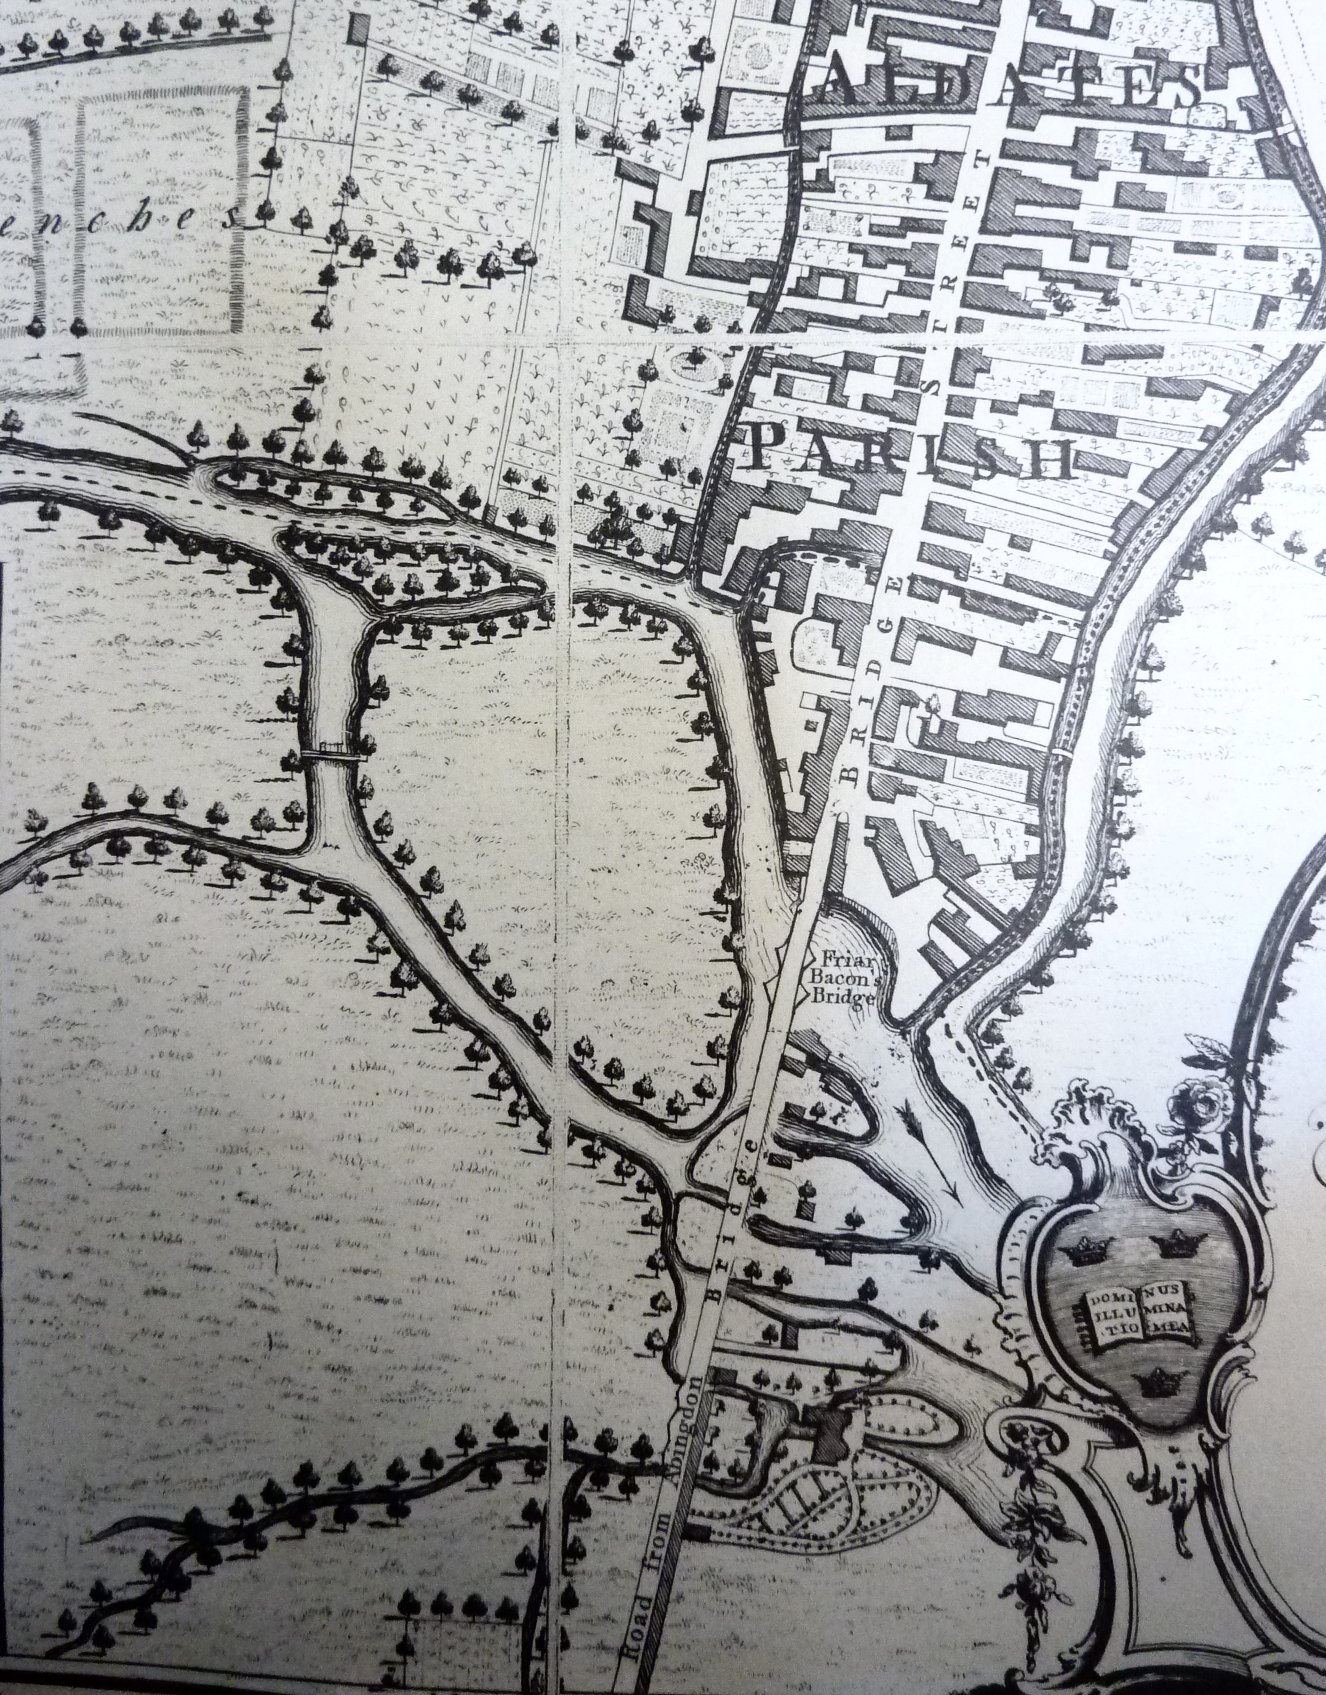 Folly Bridge & St Aldates, Taylors Map of 1750 updated by Faden 1789